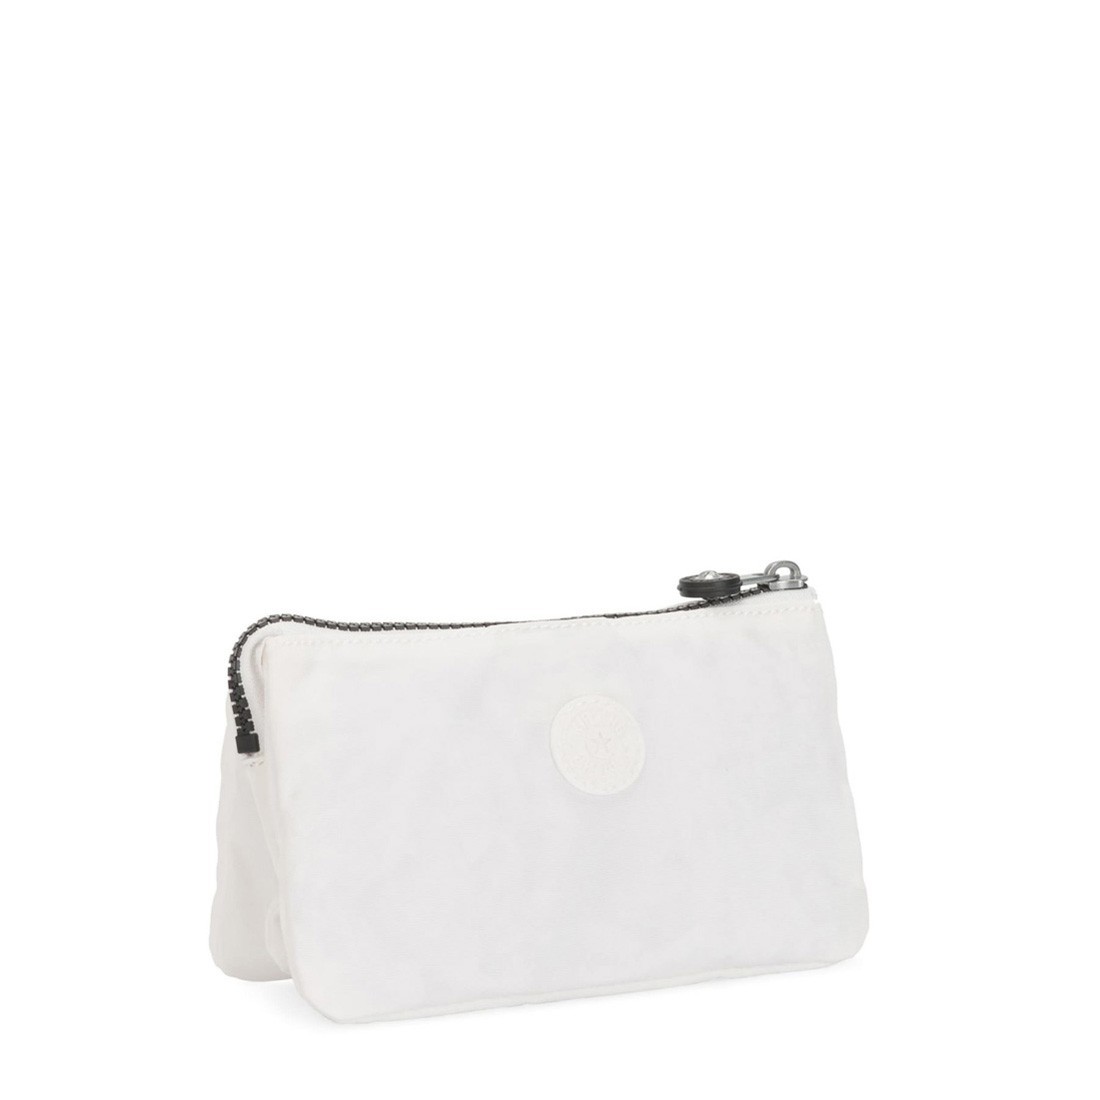 Order Kipling Creativity Multi-Use Pouch - Definition - Kipling, delivered  to your home | The Outfit